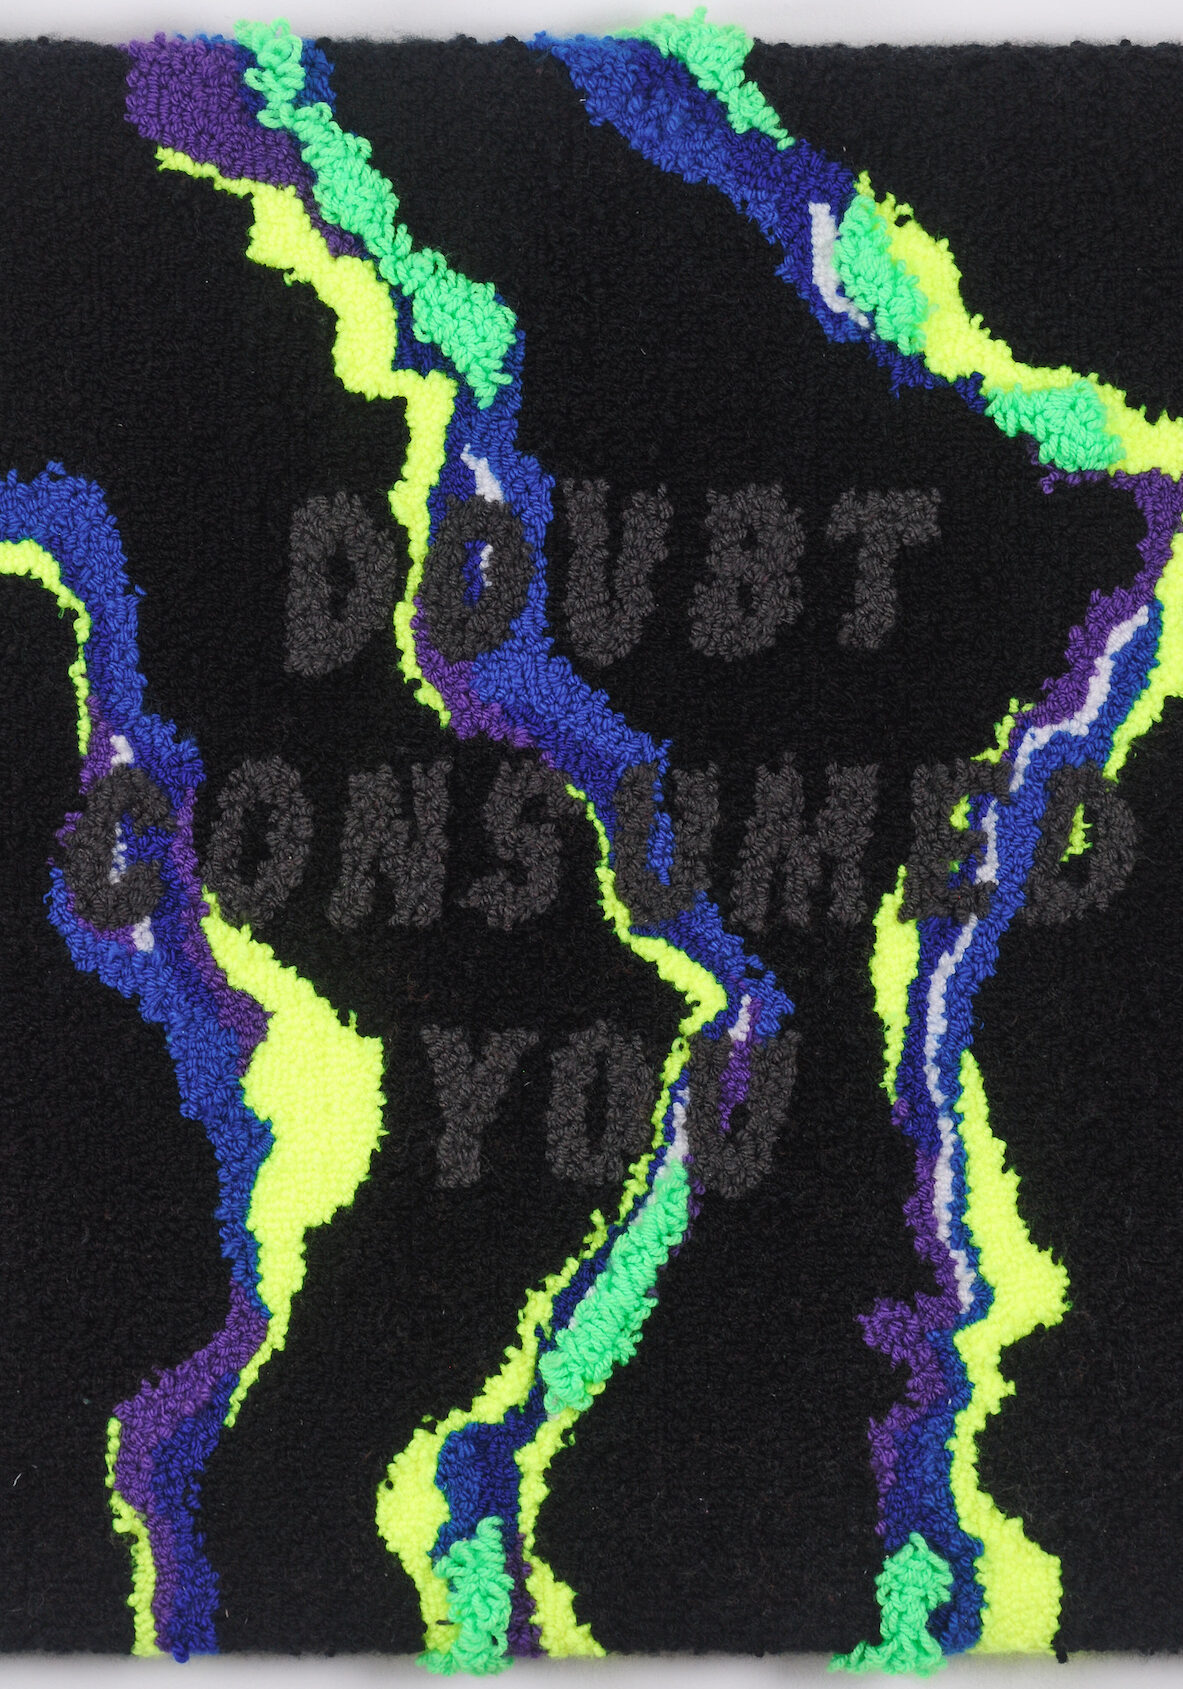 Fabric glued together in neon green, blue, yellow, and black with text